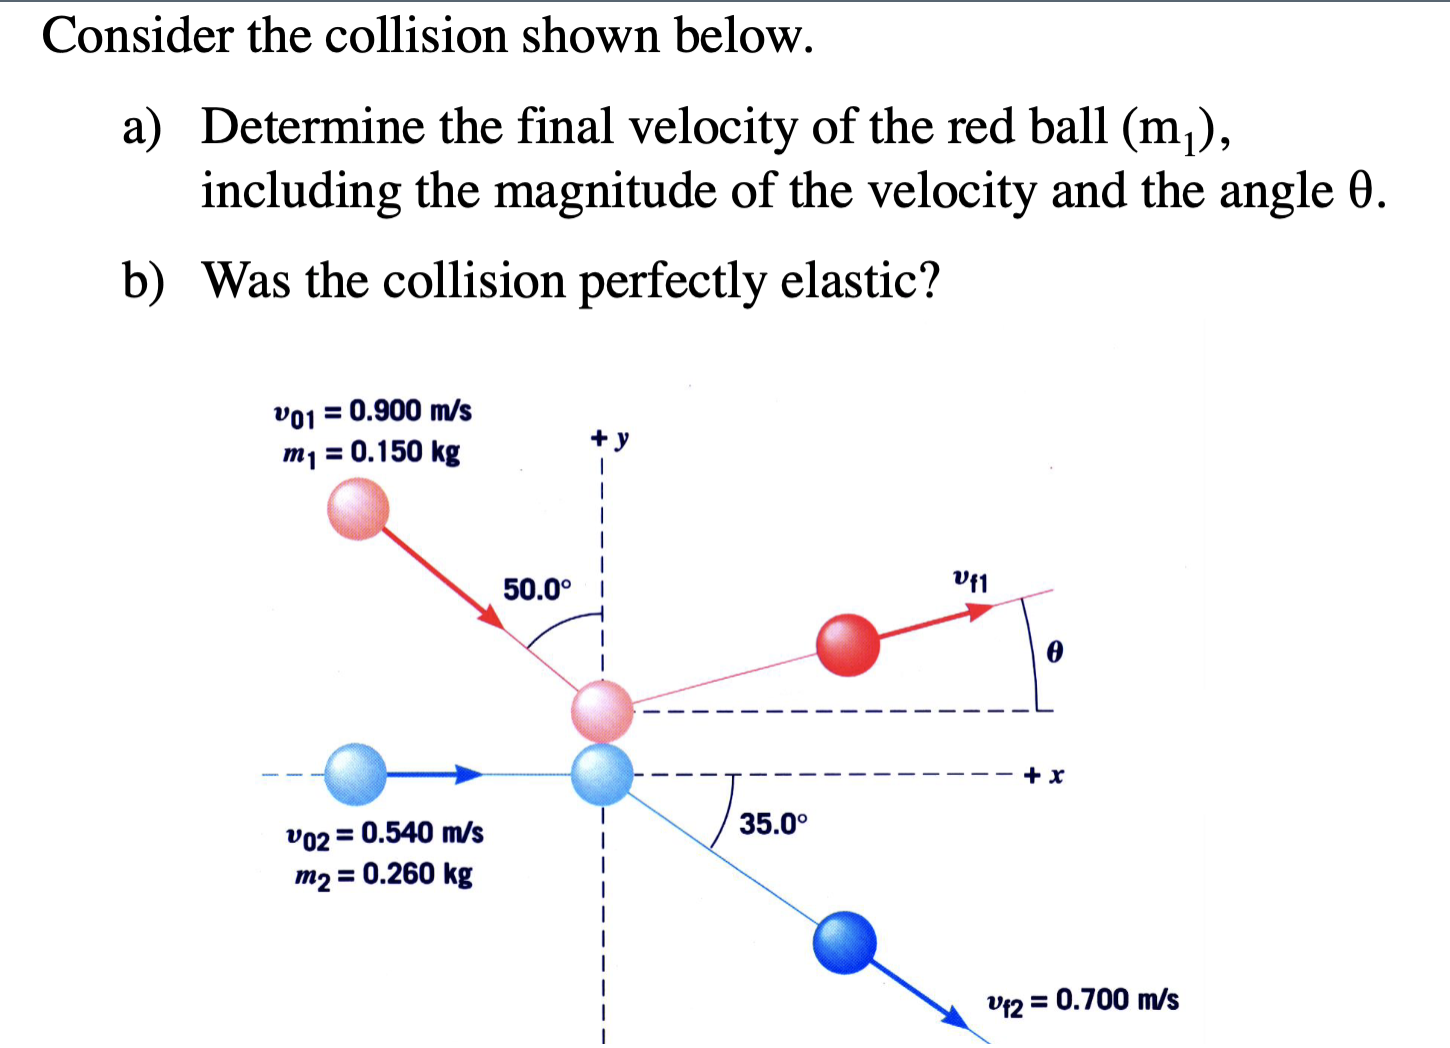 Consider the collision shown below.
a) Determine the final velocity of the red ball (m,),
including the magnitude of the velocity and the angle 0.
b) Was the collision perfectly elastic?
V01 = 0.900 m/s
m1 = 0.150 kg
%3D
50.0°
Vf1
35.0°
vo2 = 0.540 m/s
m2 = 0.260 kg
vf2 = 0.700 m/s
